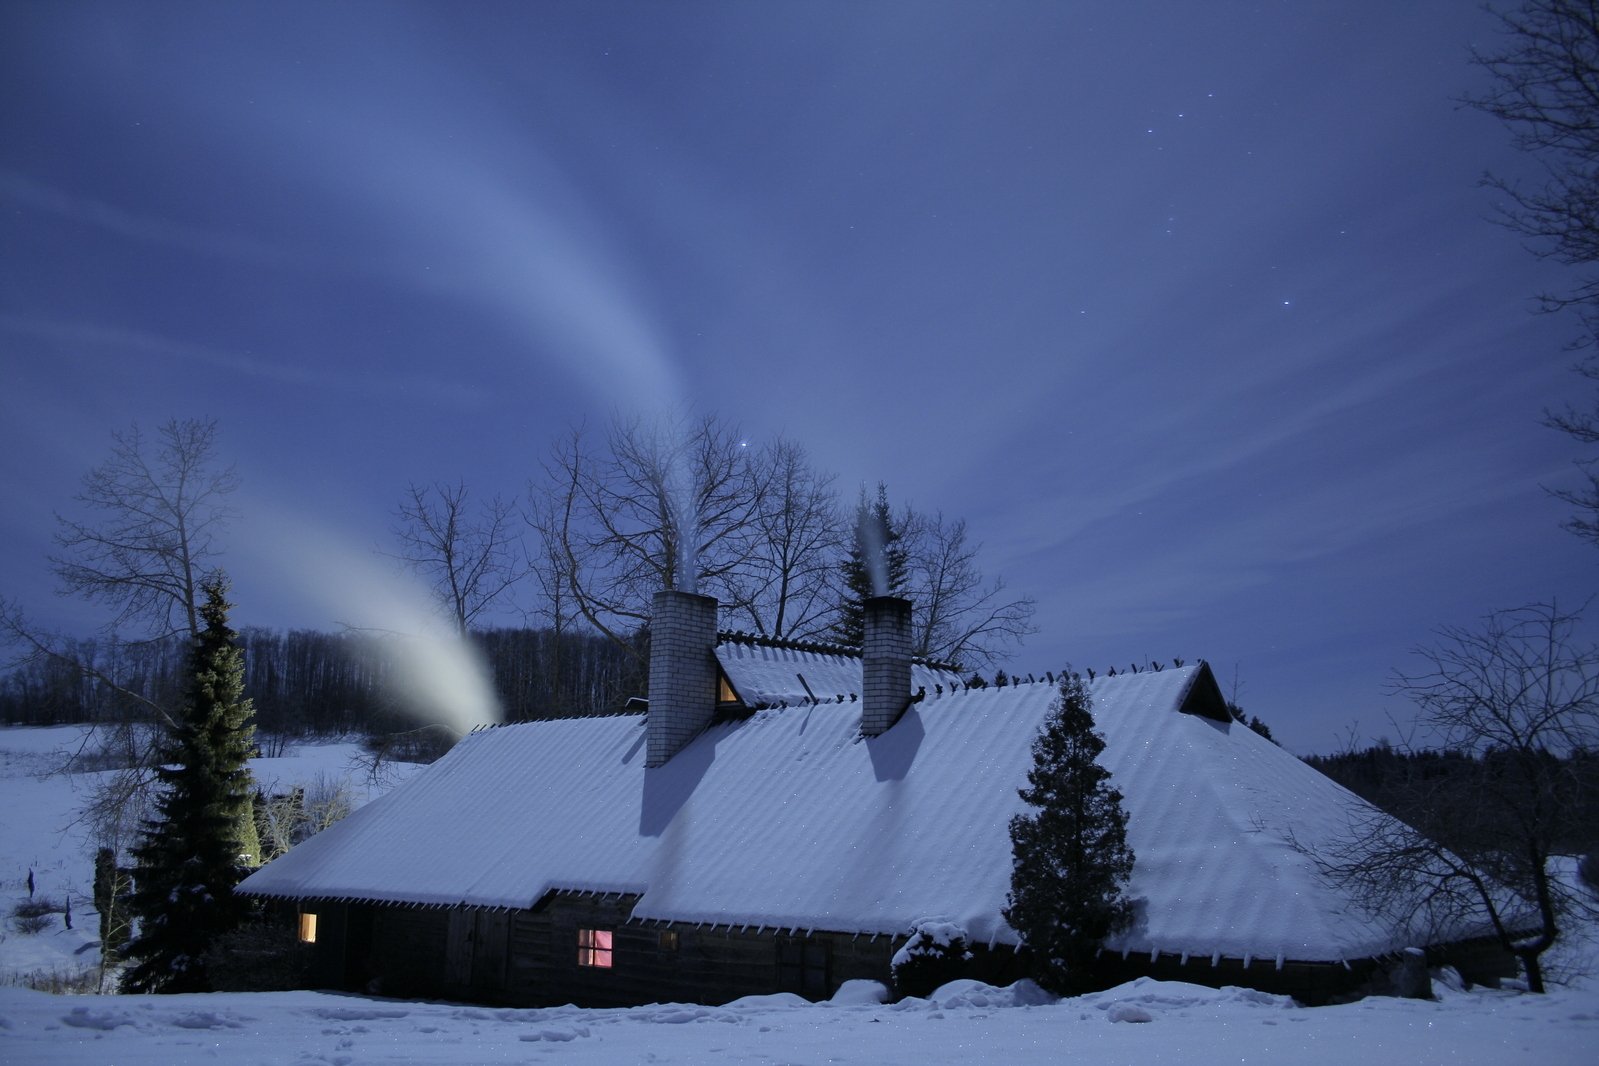 snow blows from a cloud above a house